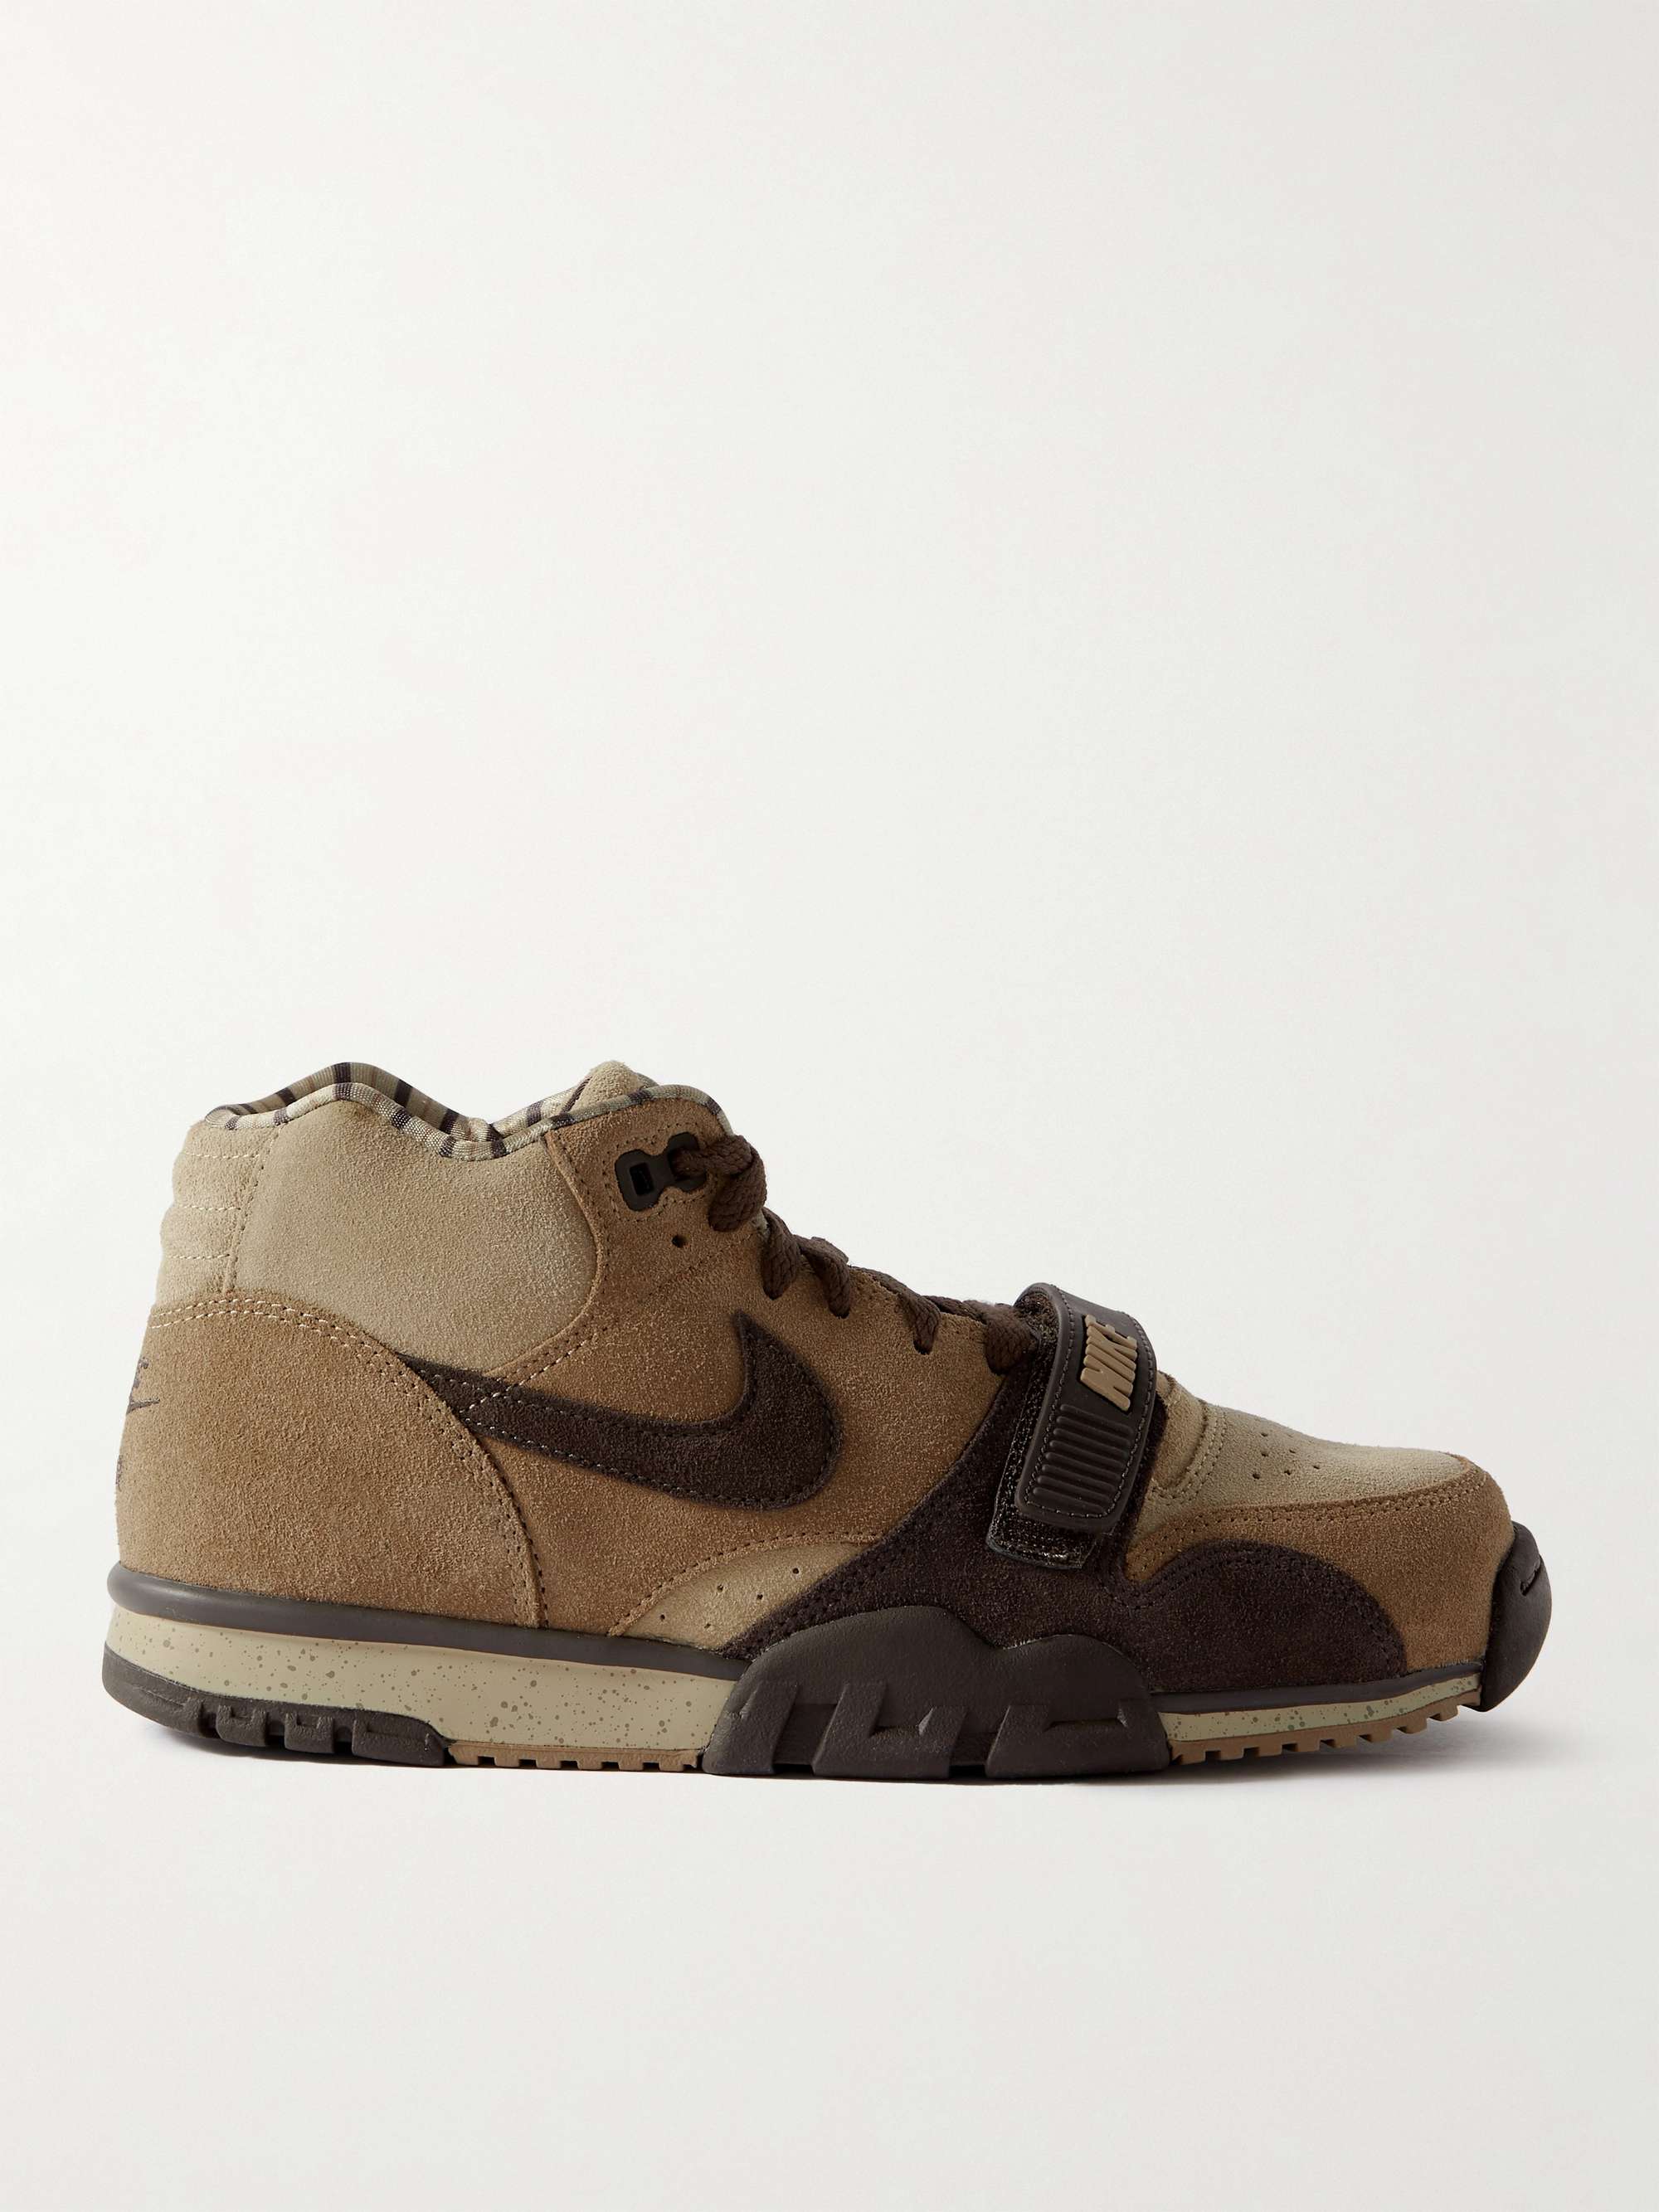 NIKE Air Trainer 1 Leather-Trimmed Suede Sneakers